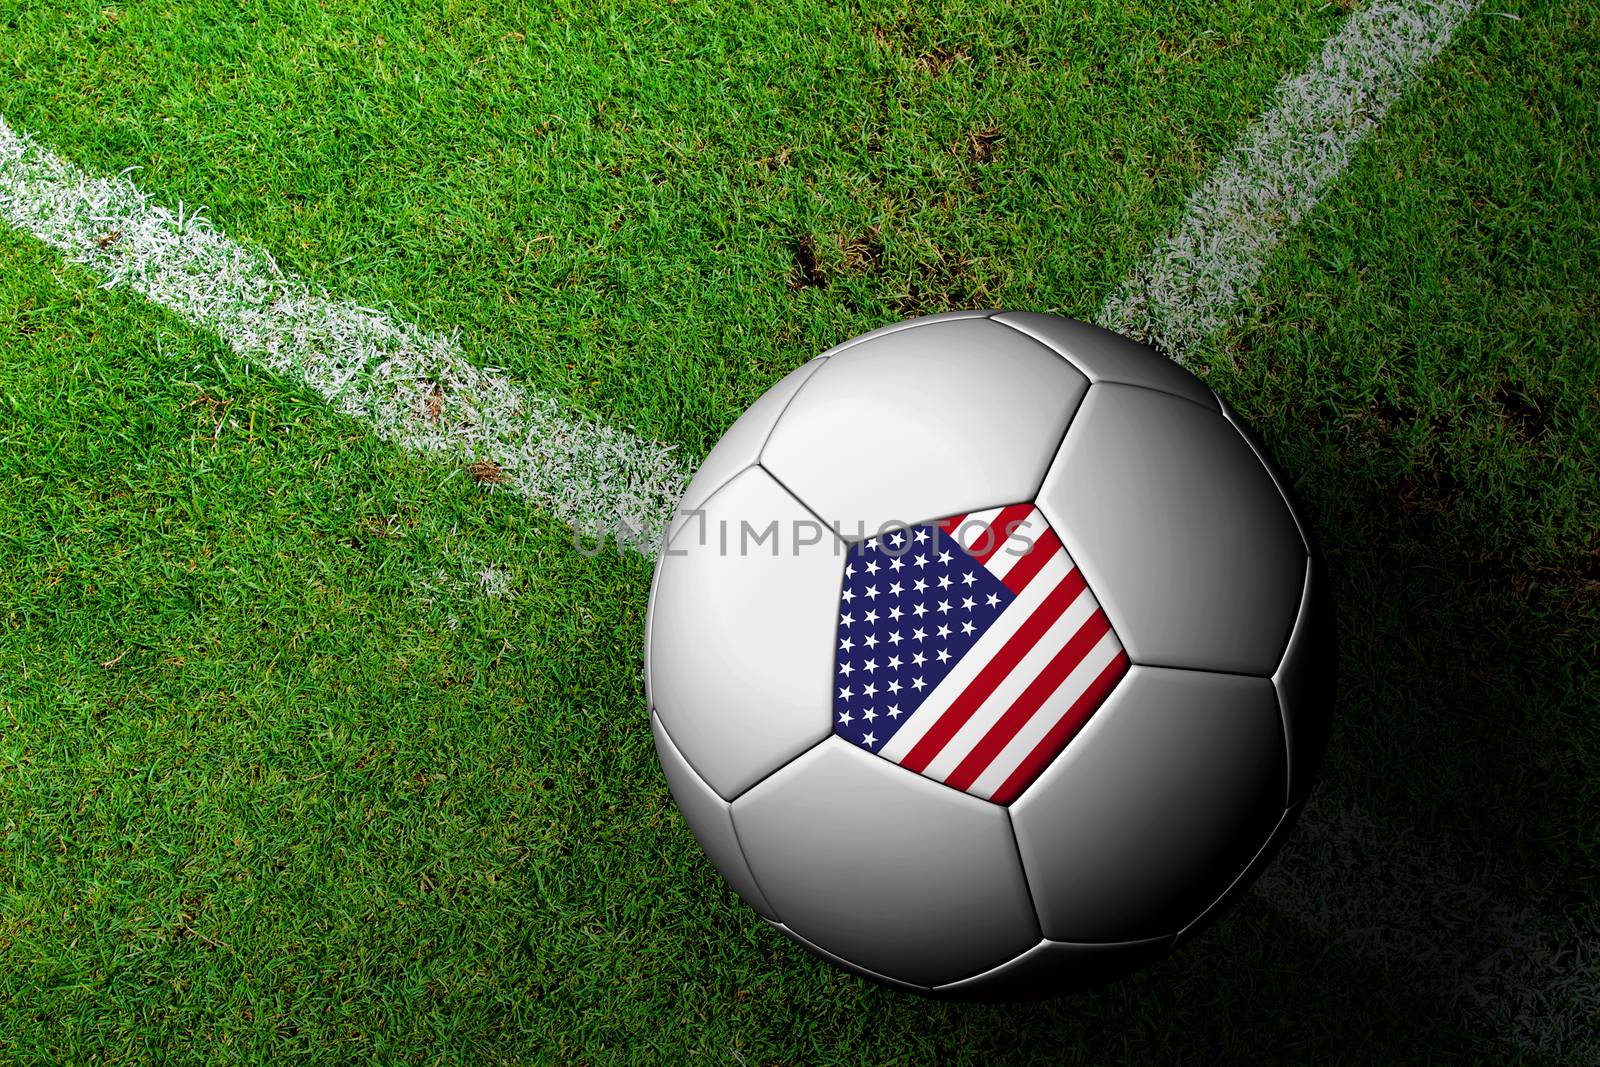 The United States Flag Pattern of a soccer ball in green grass